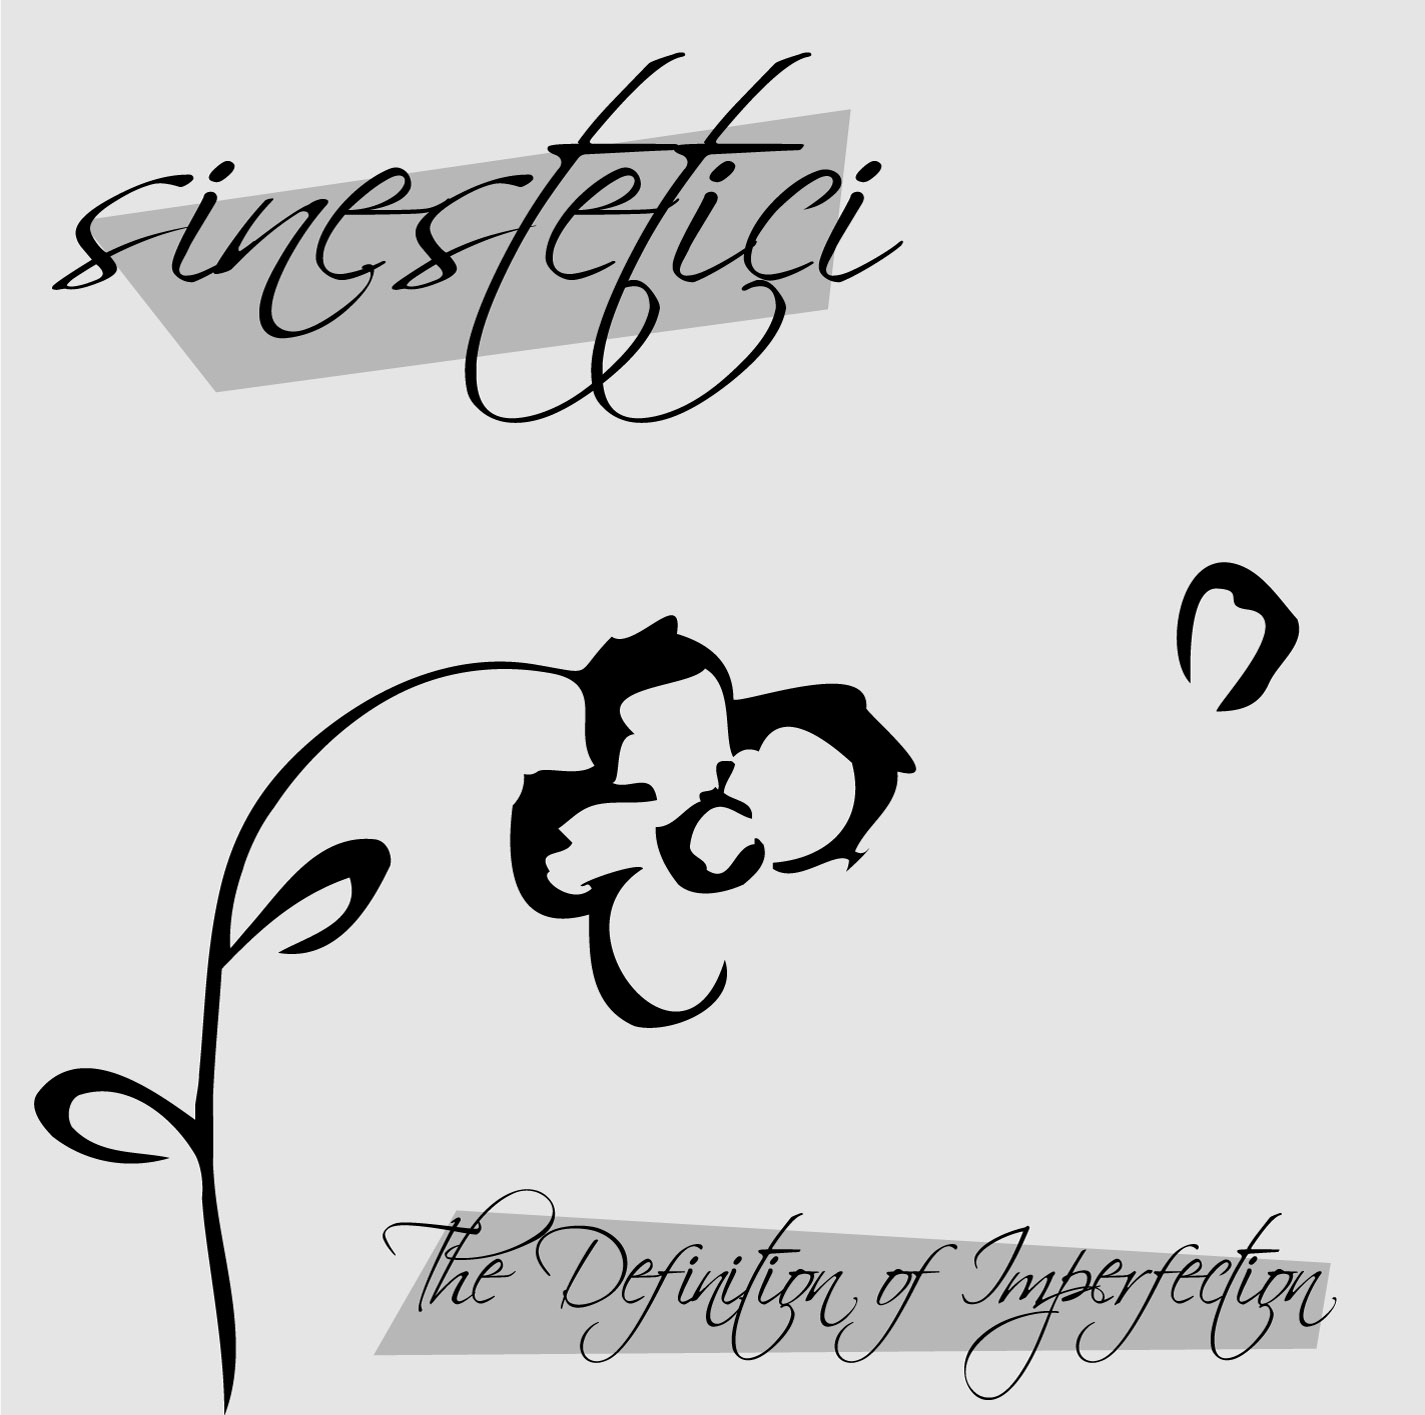 Sinestetici - The Definition of Imperfection